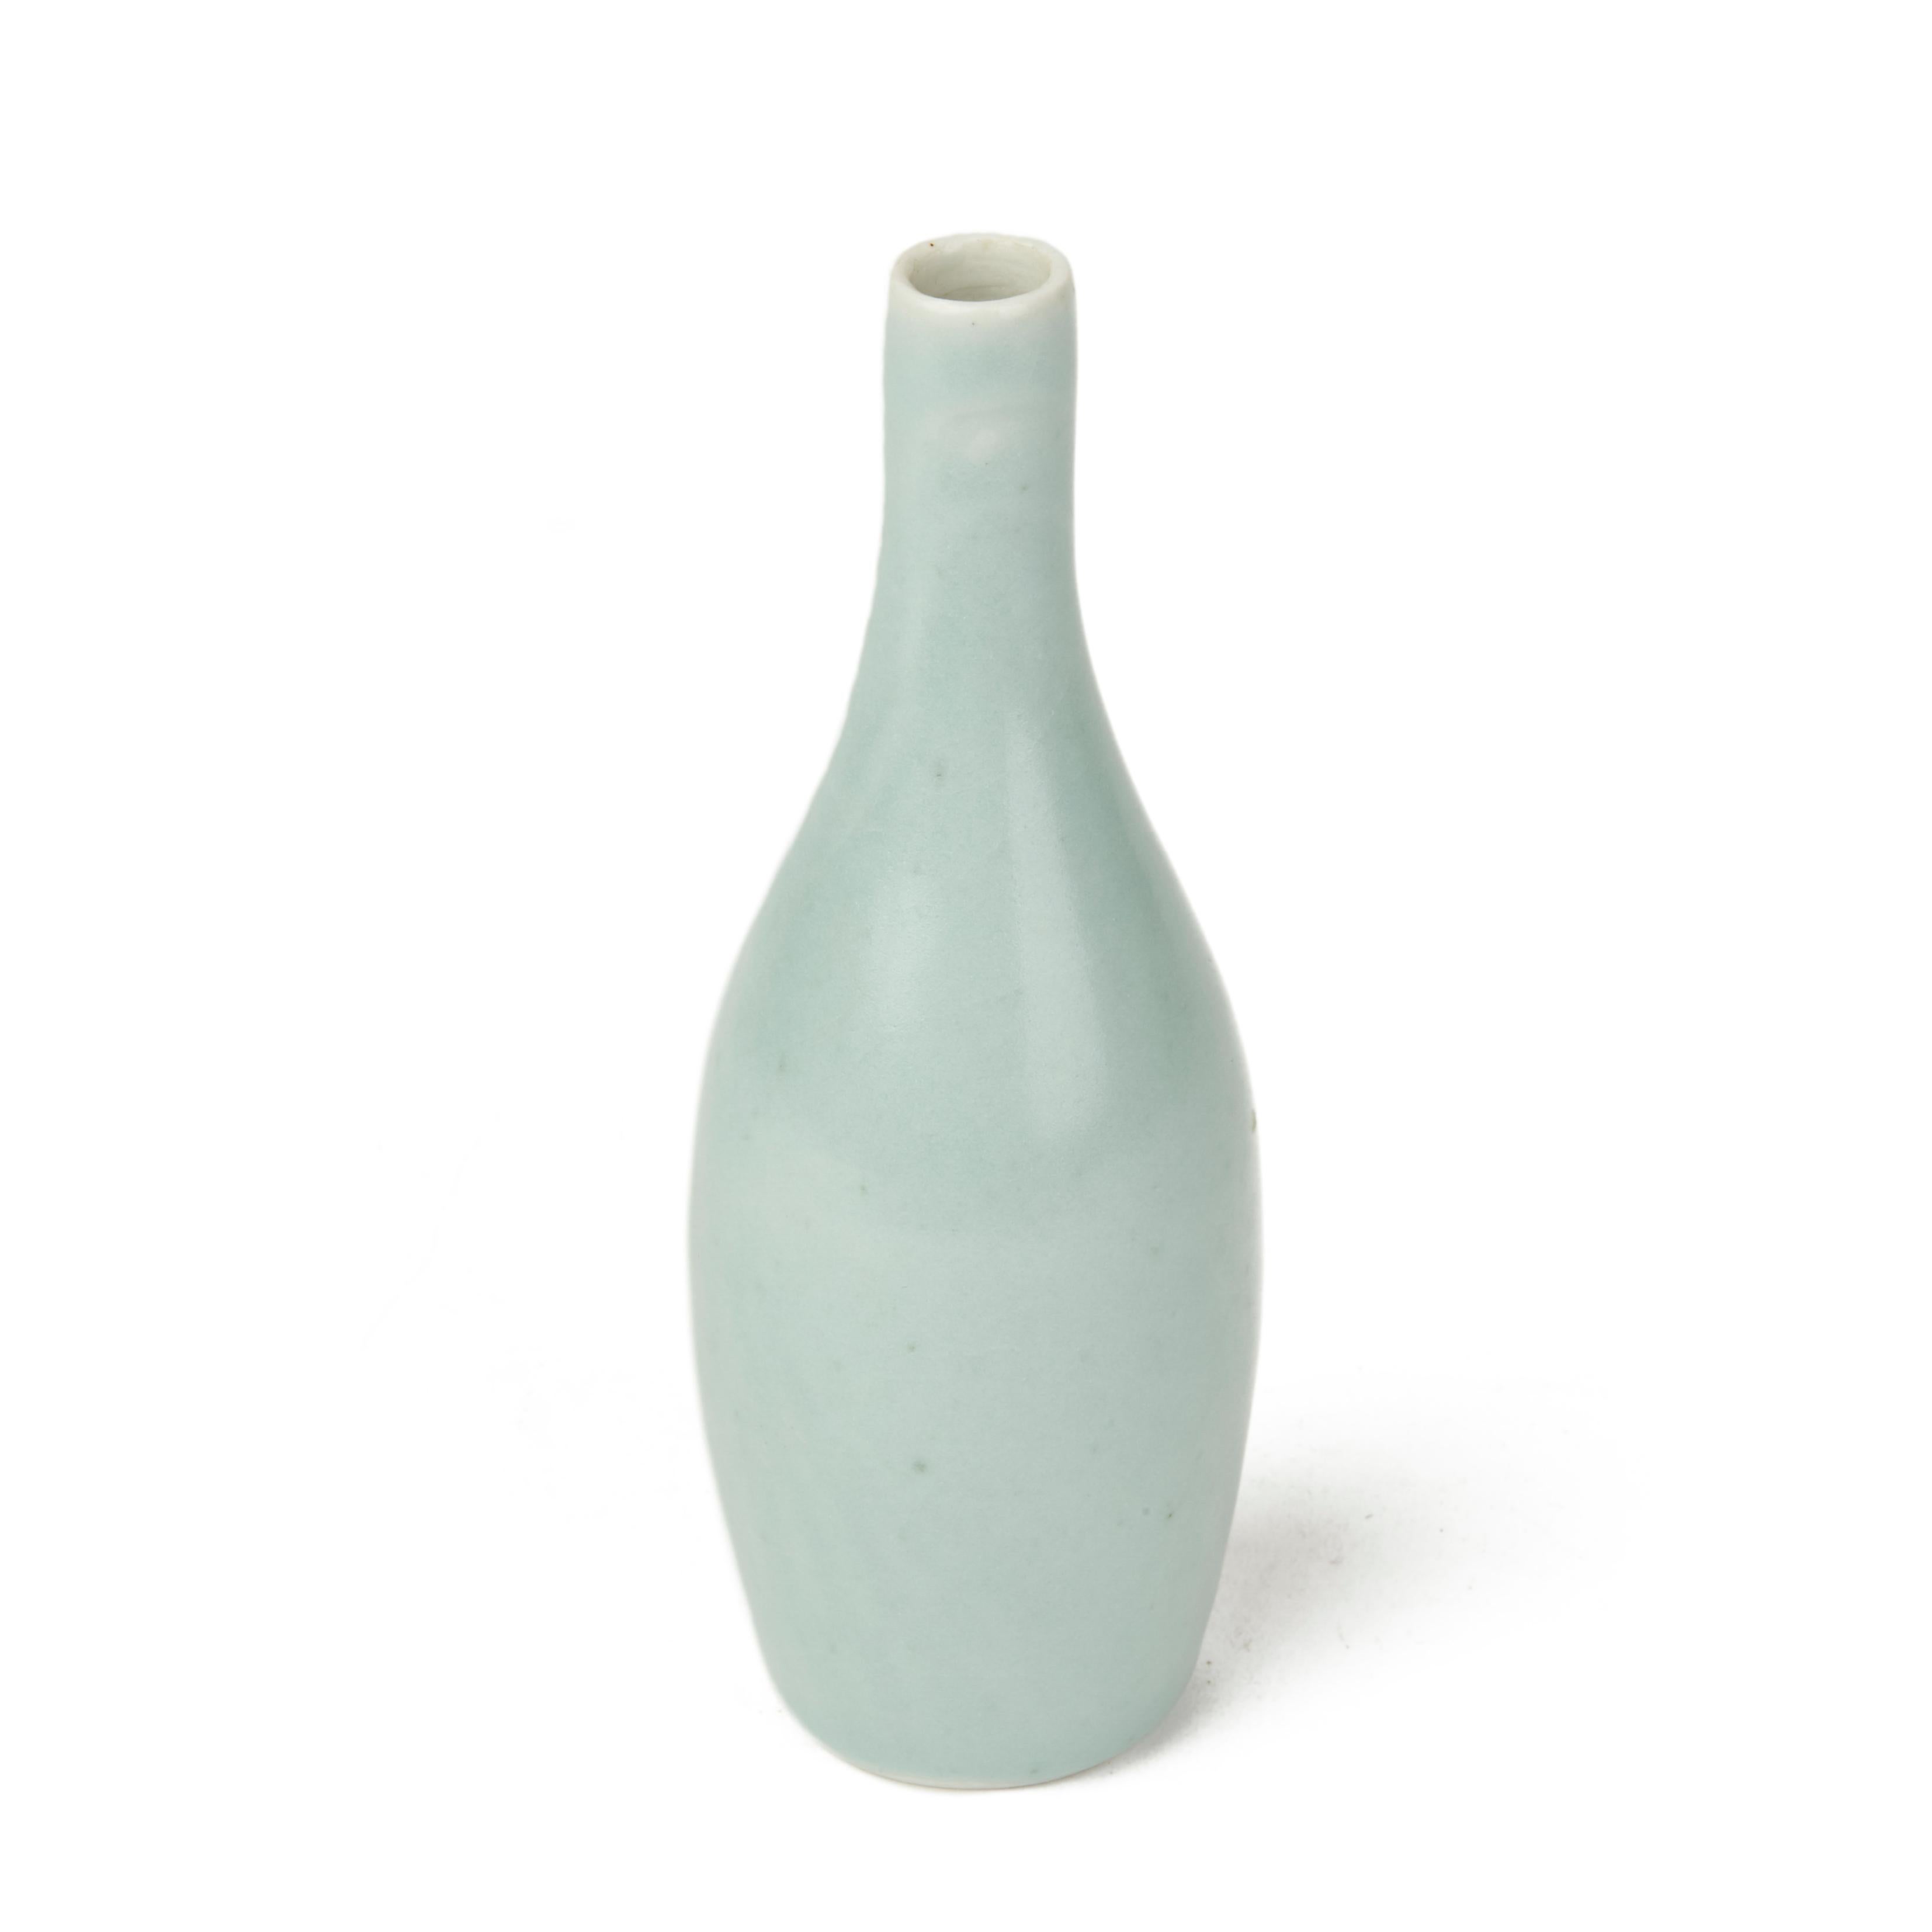 A stunning studio ceramic porcelain bottle shaped vase decorated in celadon green glazes by renowned Cambridgeshire based potter Sonia Lewis. This well potted vase stands on a rounded unglazed foot with an artists impressed mark to the base. Sonia